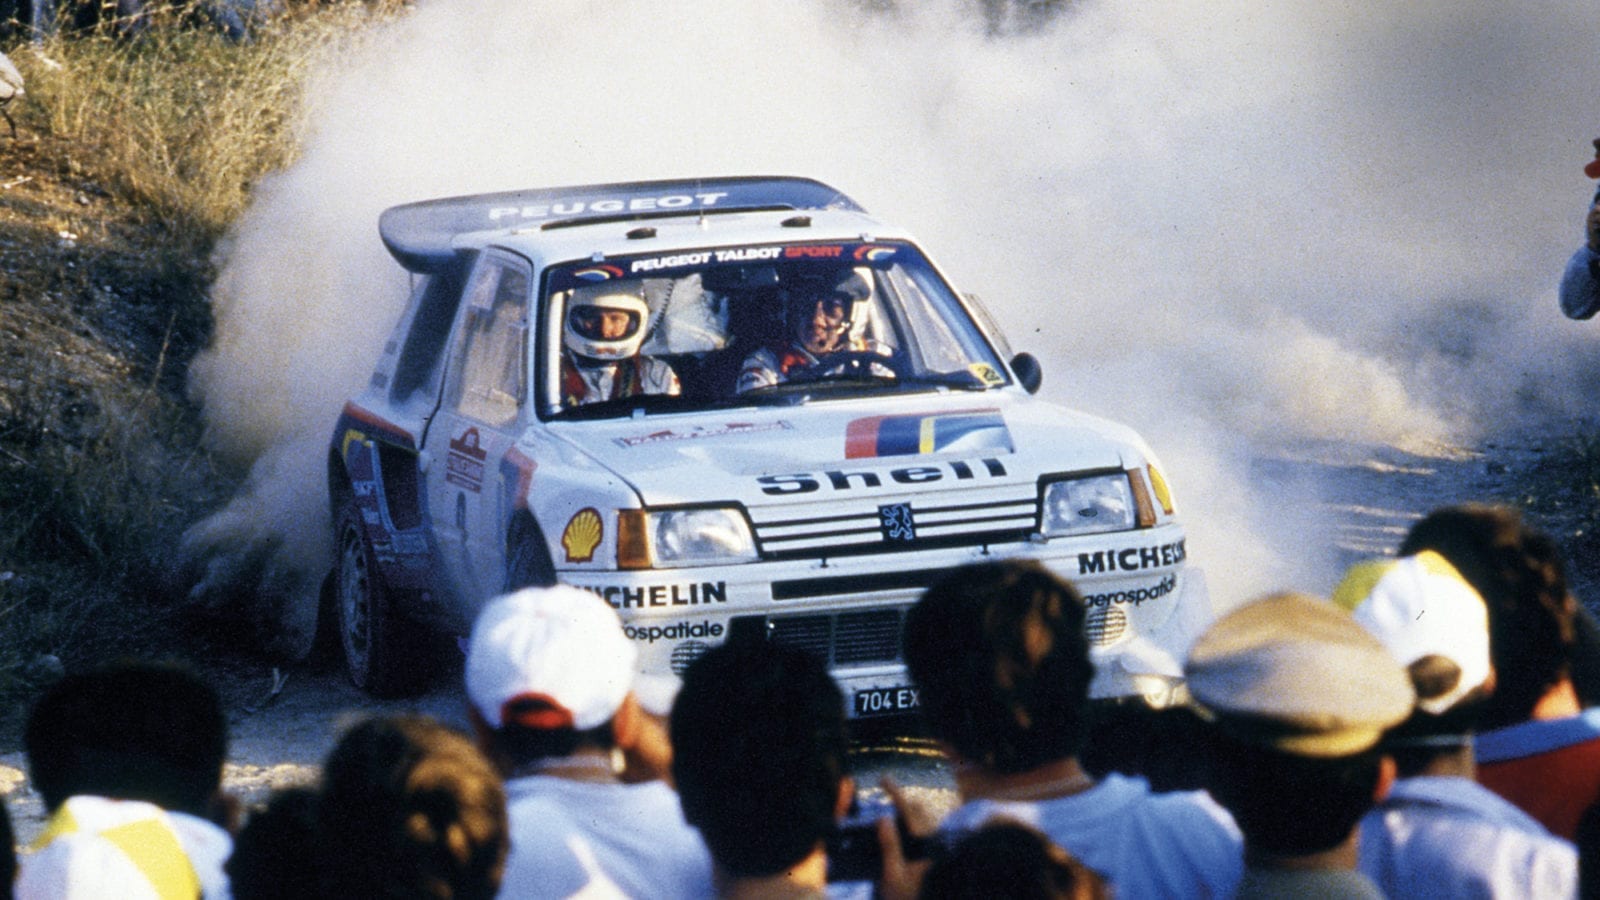 Timo Salonen drives through a water splash in his Peugeot 205 T16 in the 1986 Sanremo Rally